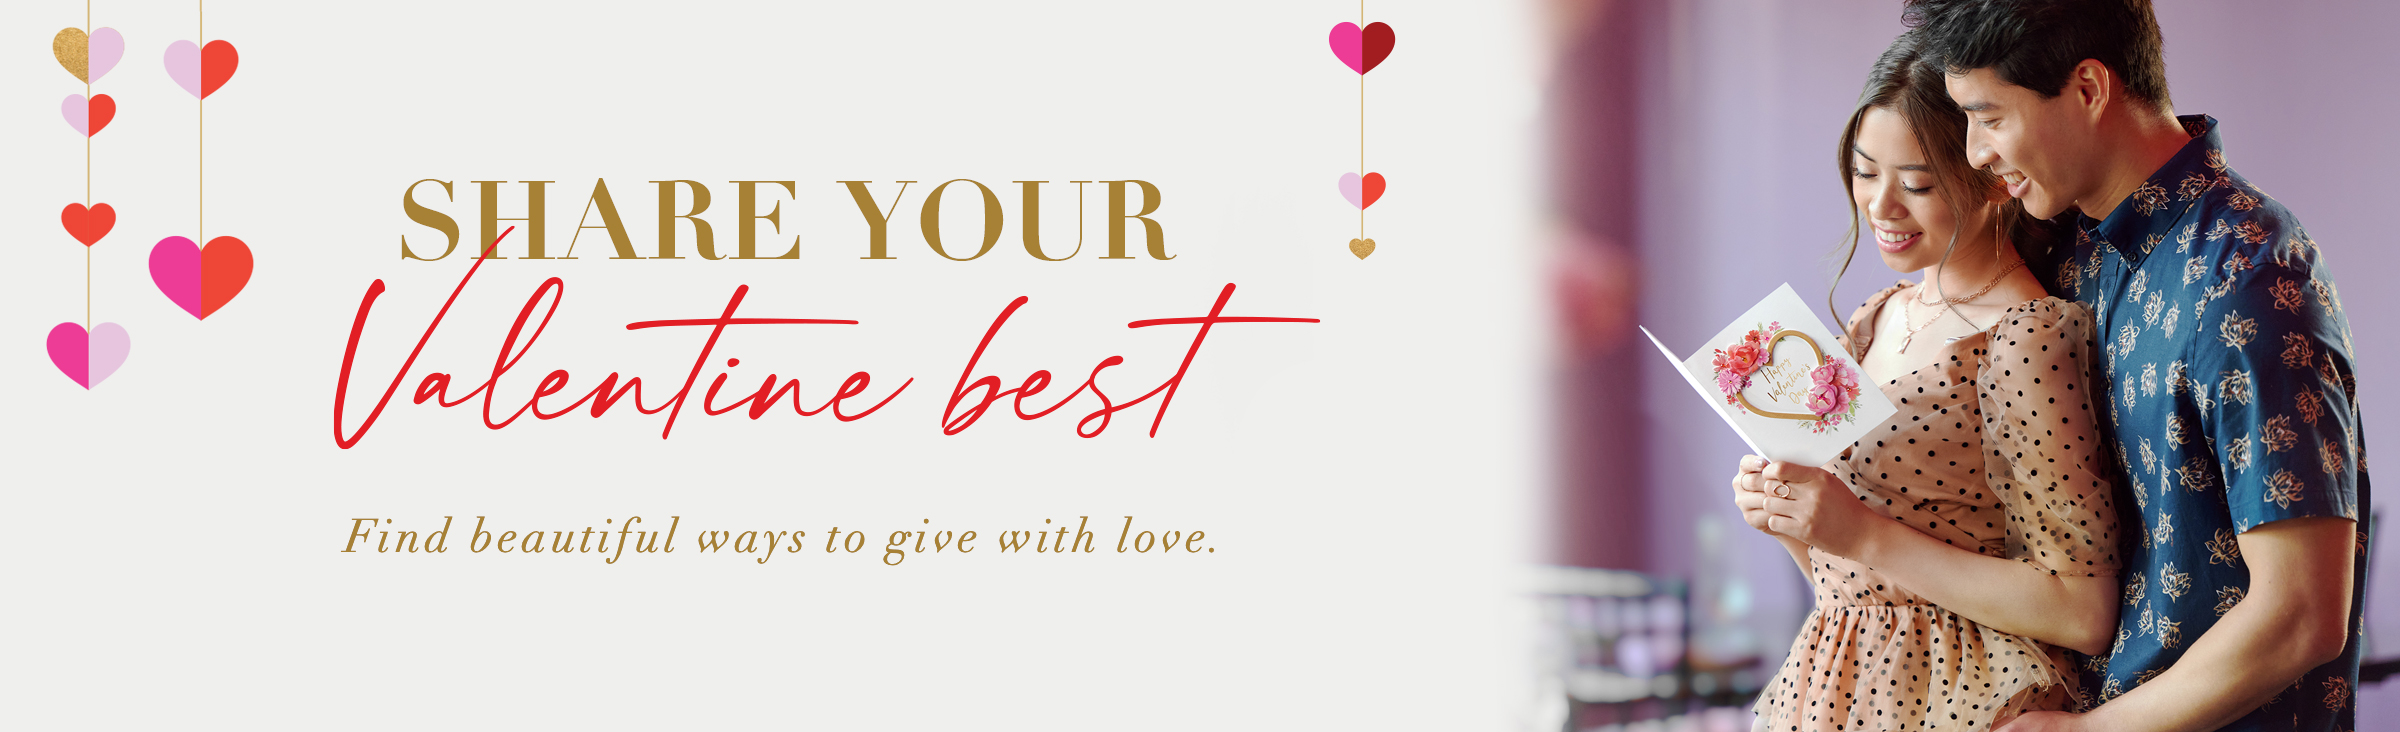 Share your Valentine best Find beautiful ways to give with love